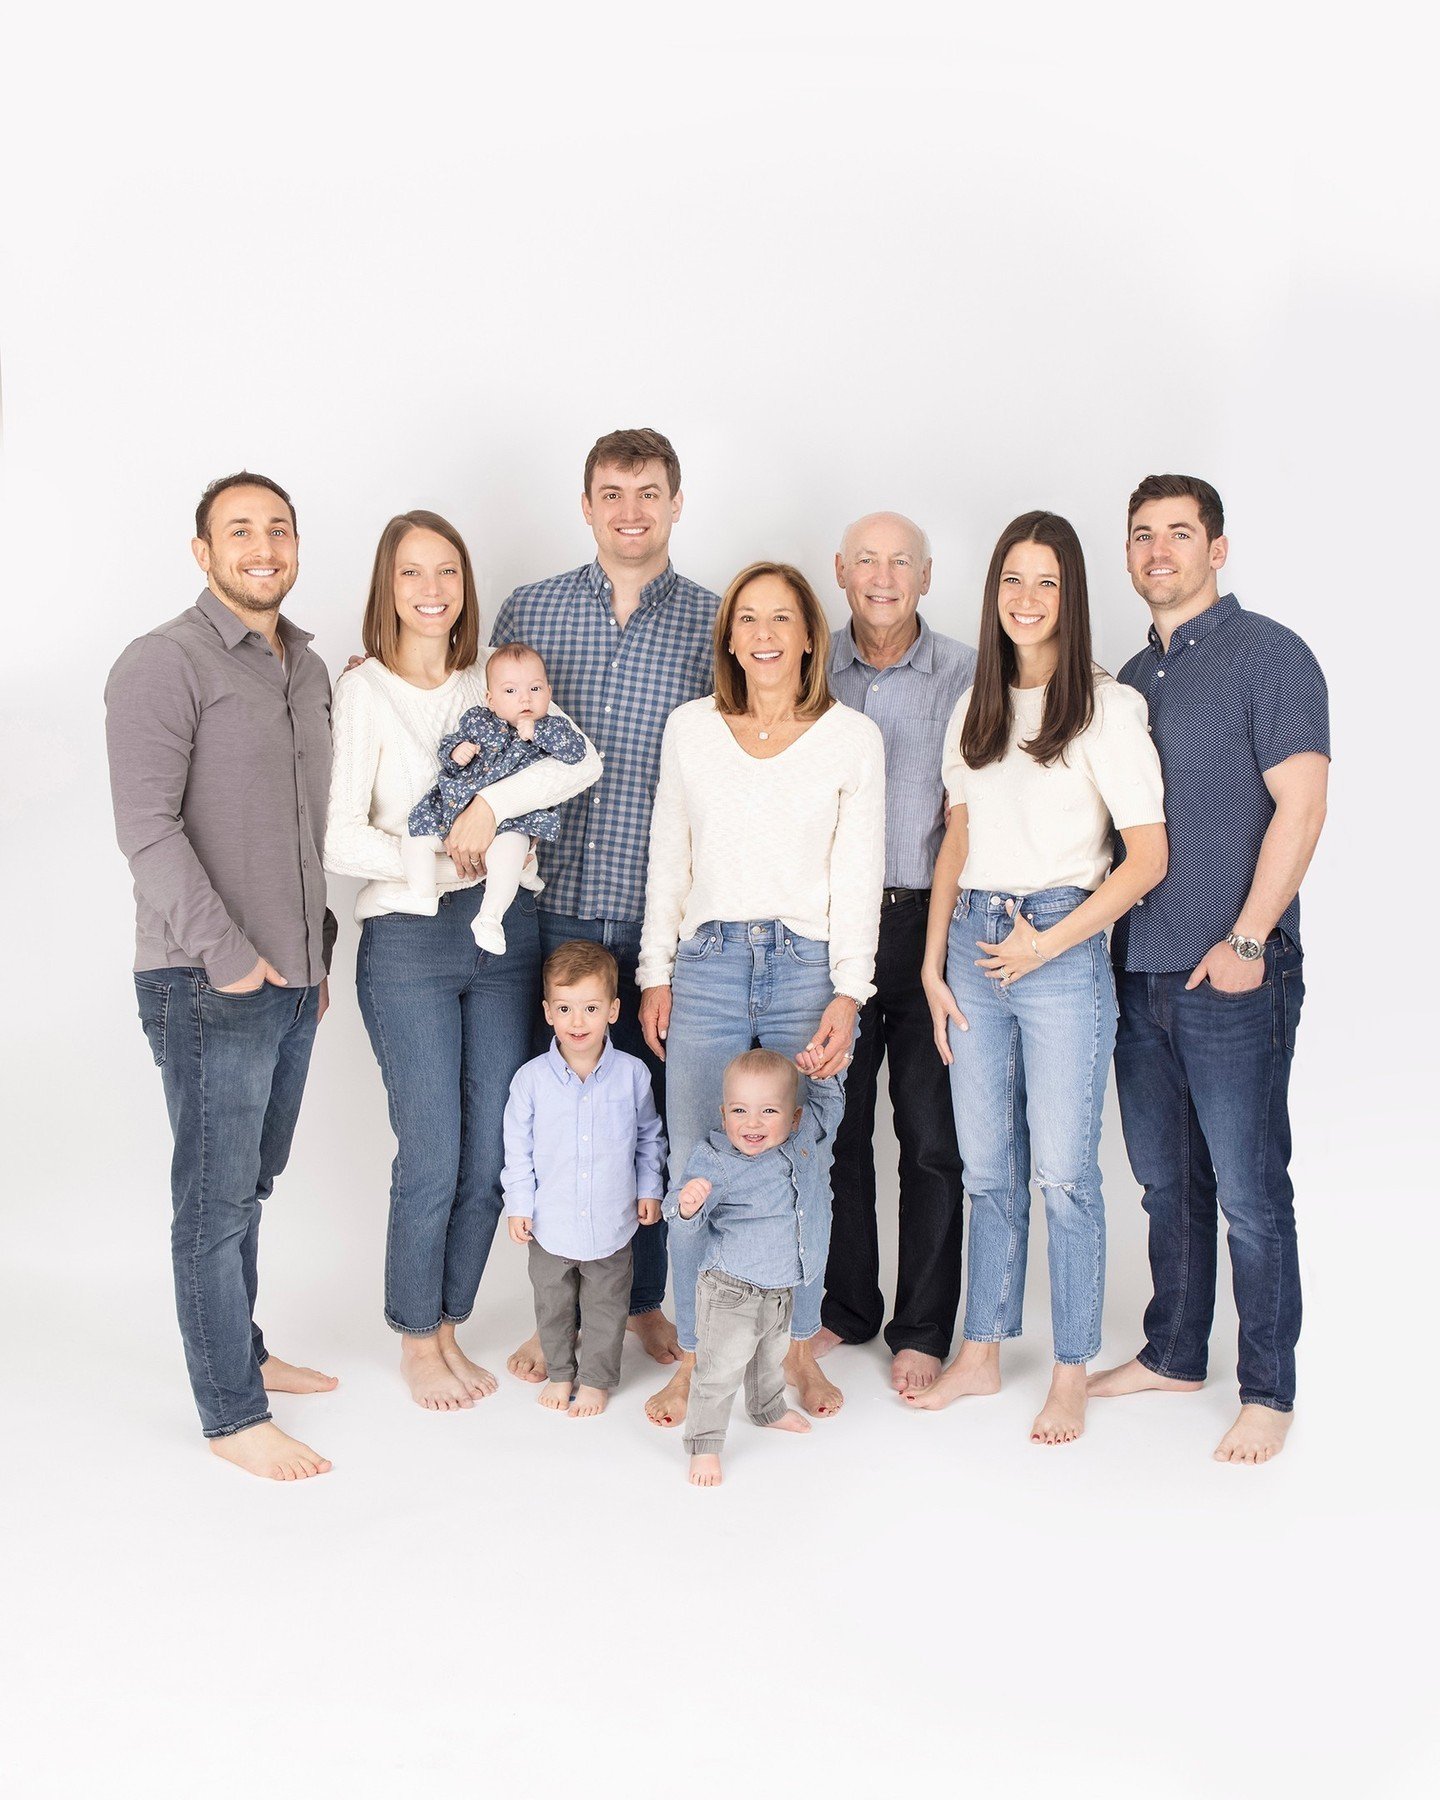 Pro tip for a large family outfit guide: You pick three colors and have everyone stick to those choices! Everyone in the photo got the memo. 
.
.
.
#FamilyPortraitSession #FamilyPhotoSession  #SpringFun #NewbornPhotographers #MothersDay #FamilyPortra